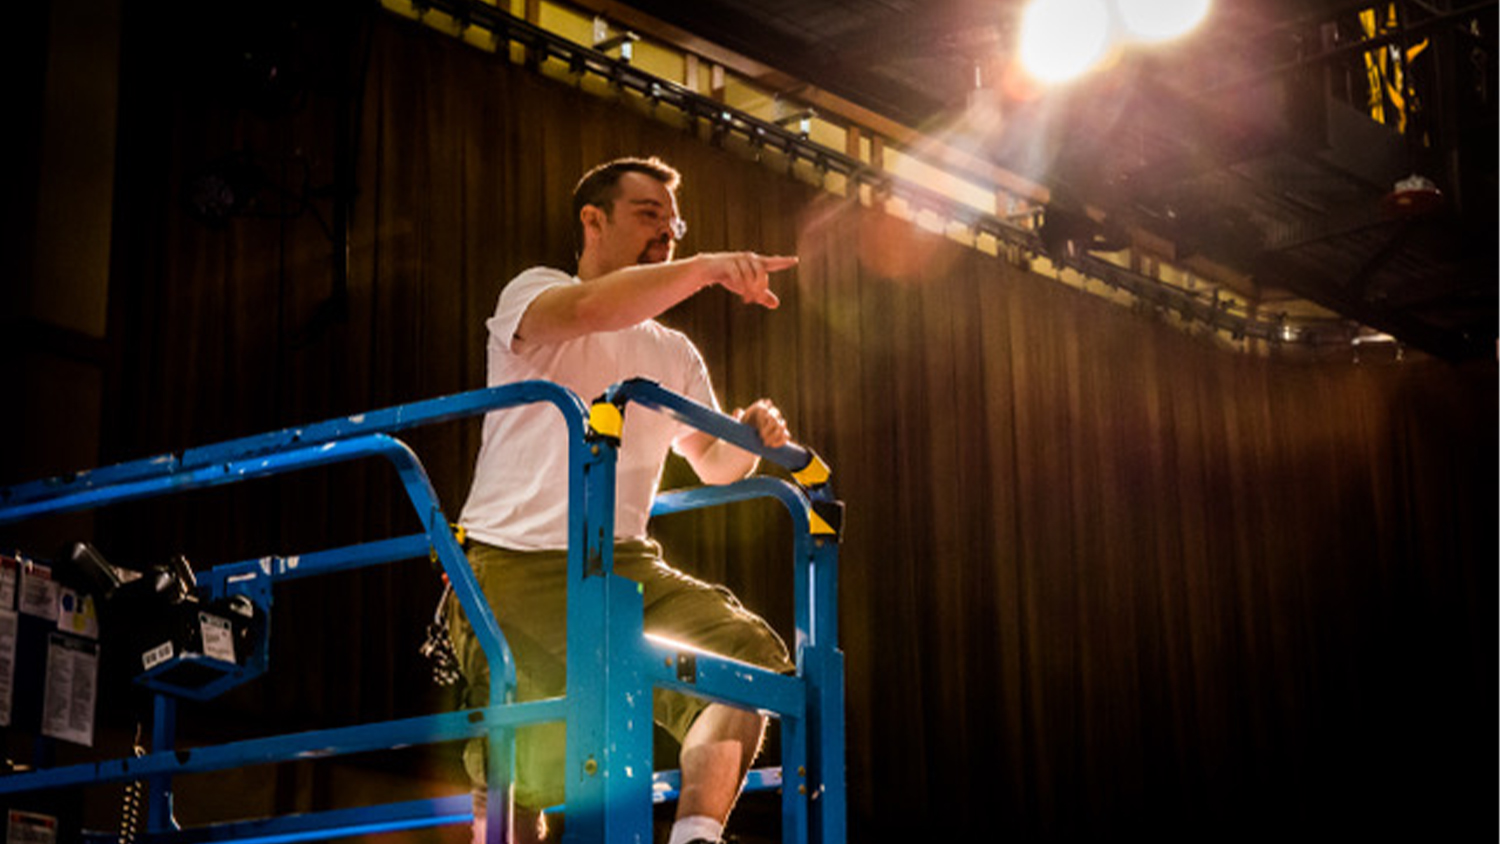 Joshua Reaves overlooking the set in Titmus Theatre. Photo by Nick Purdy.